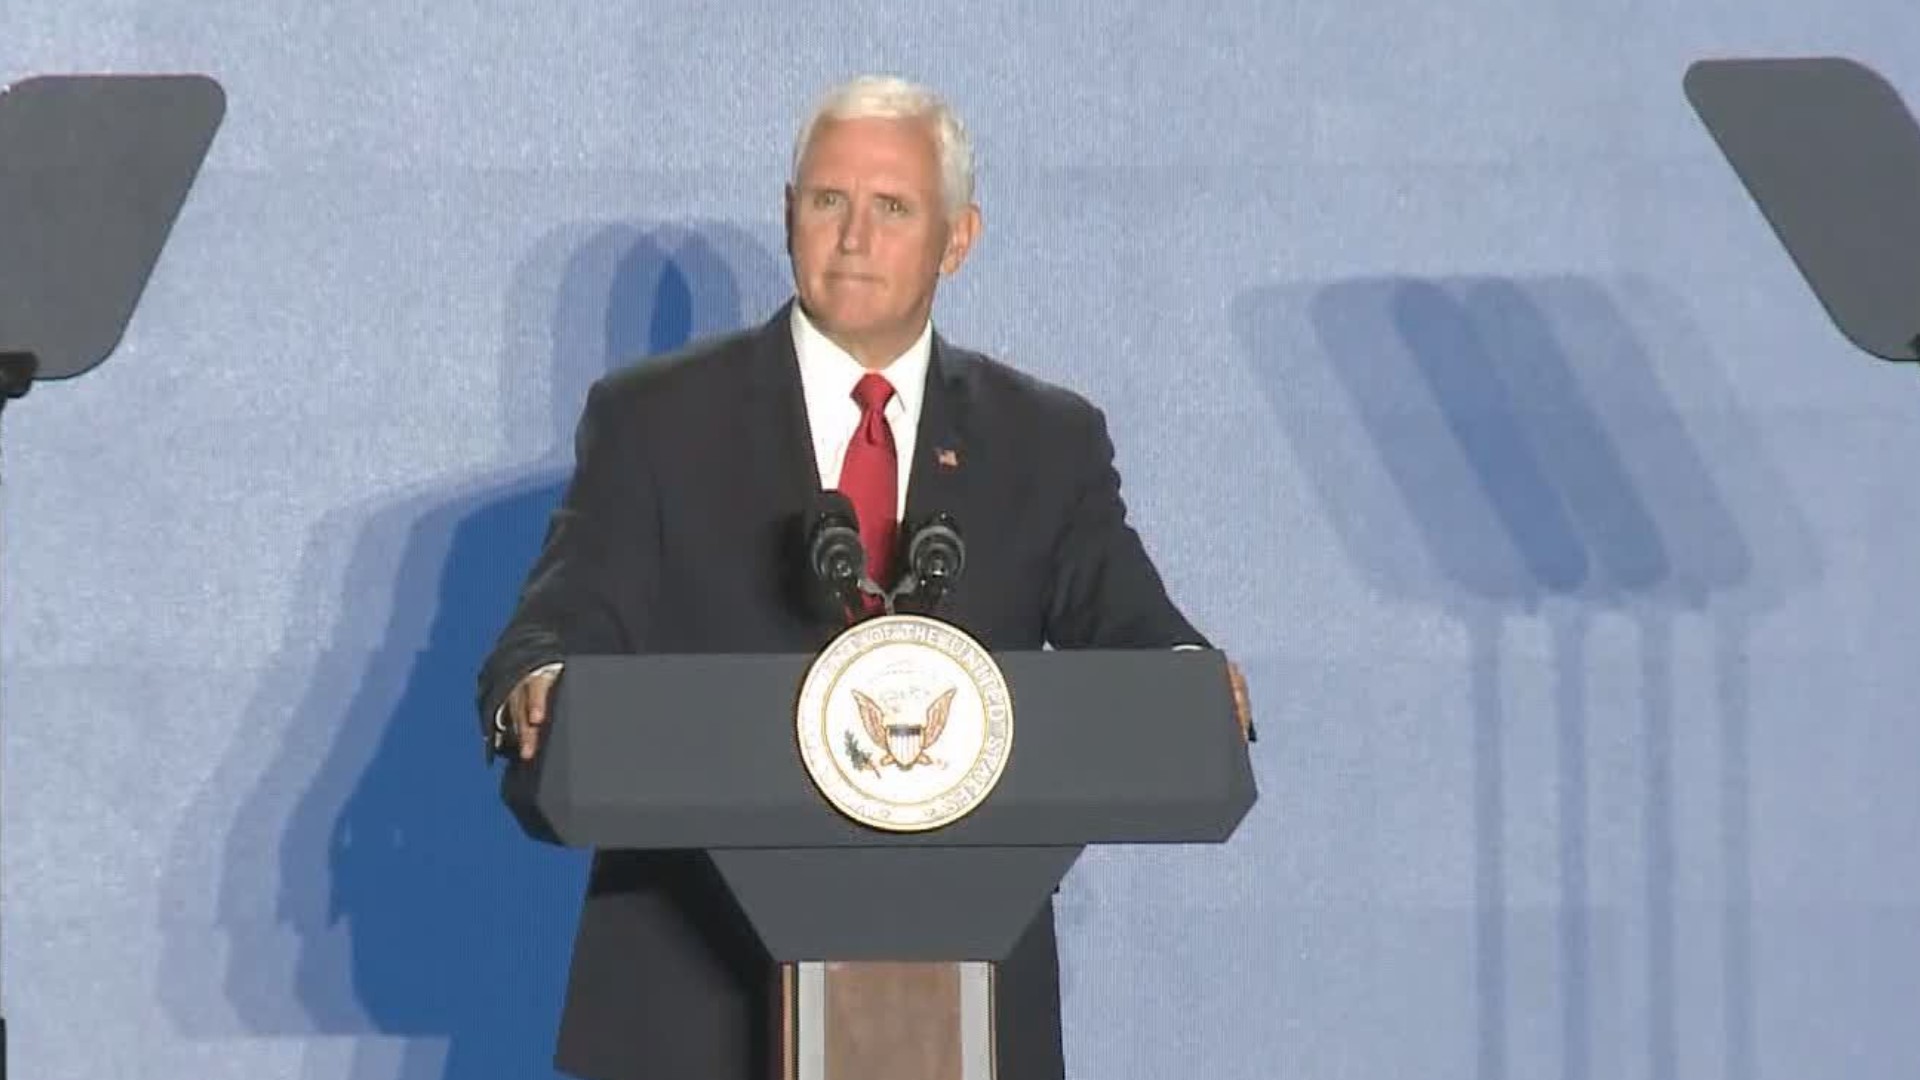 The vice president was in Georgia on Friday to speak at the Resurgent Gathering, a conservative conference being held this weekend in Atlanta by commentator Erick Erickson.